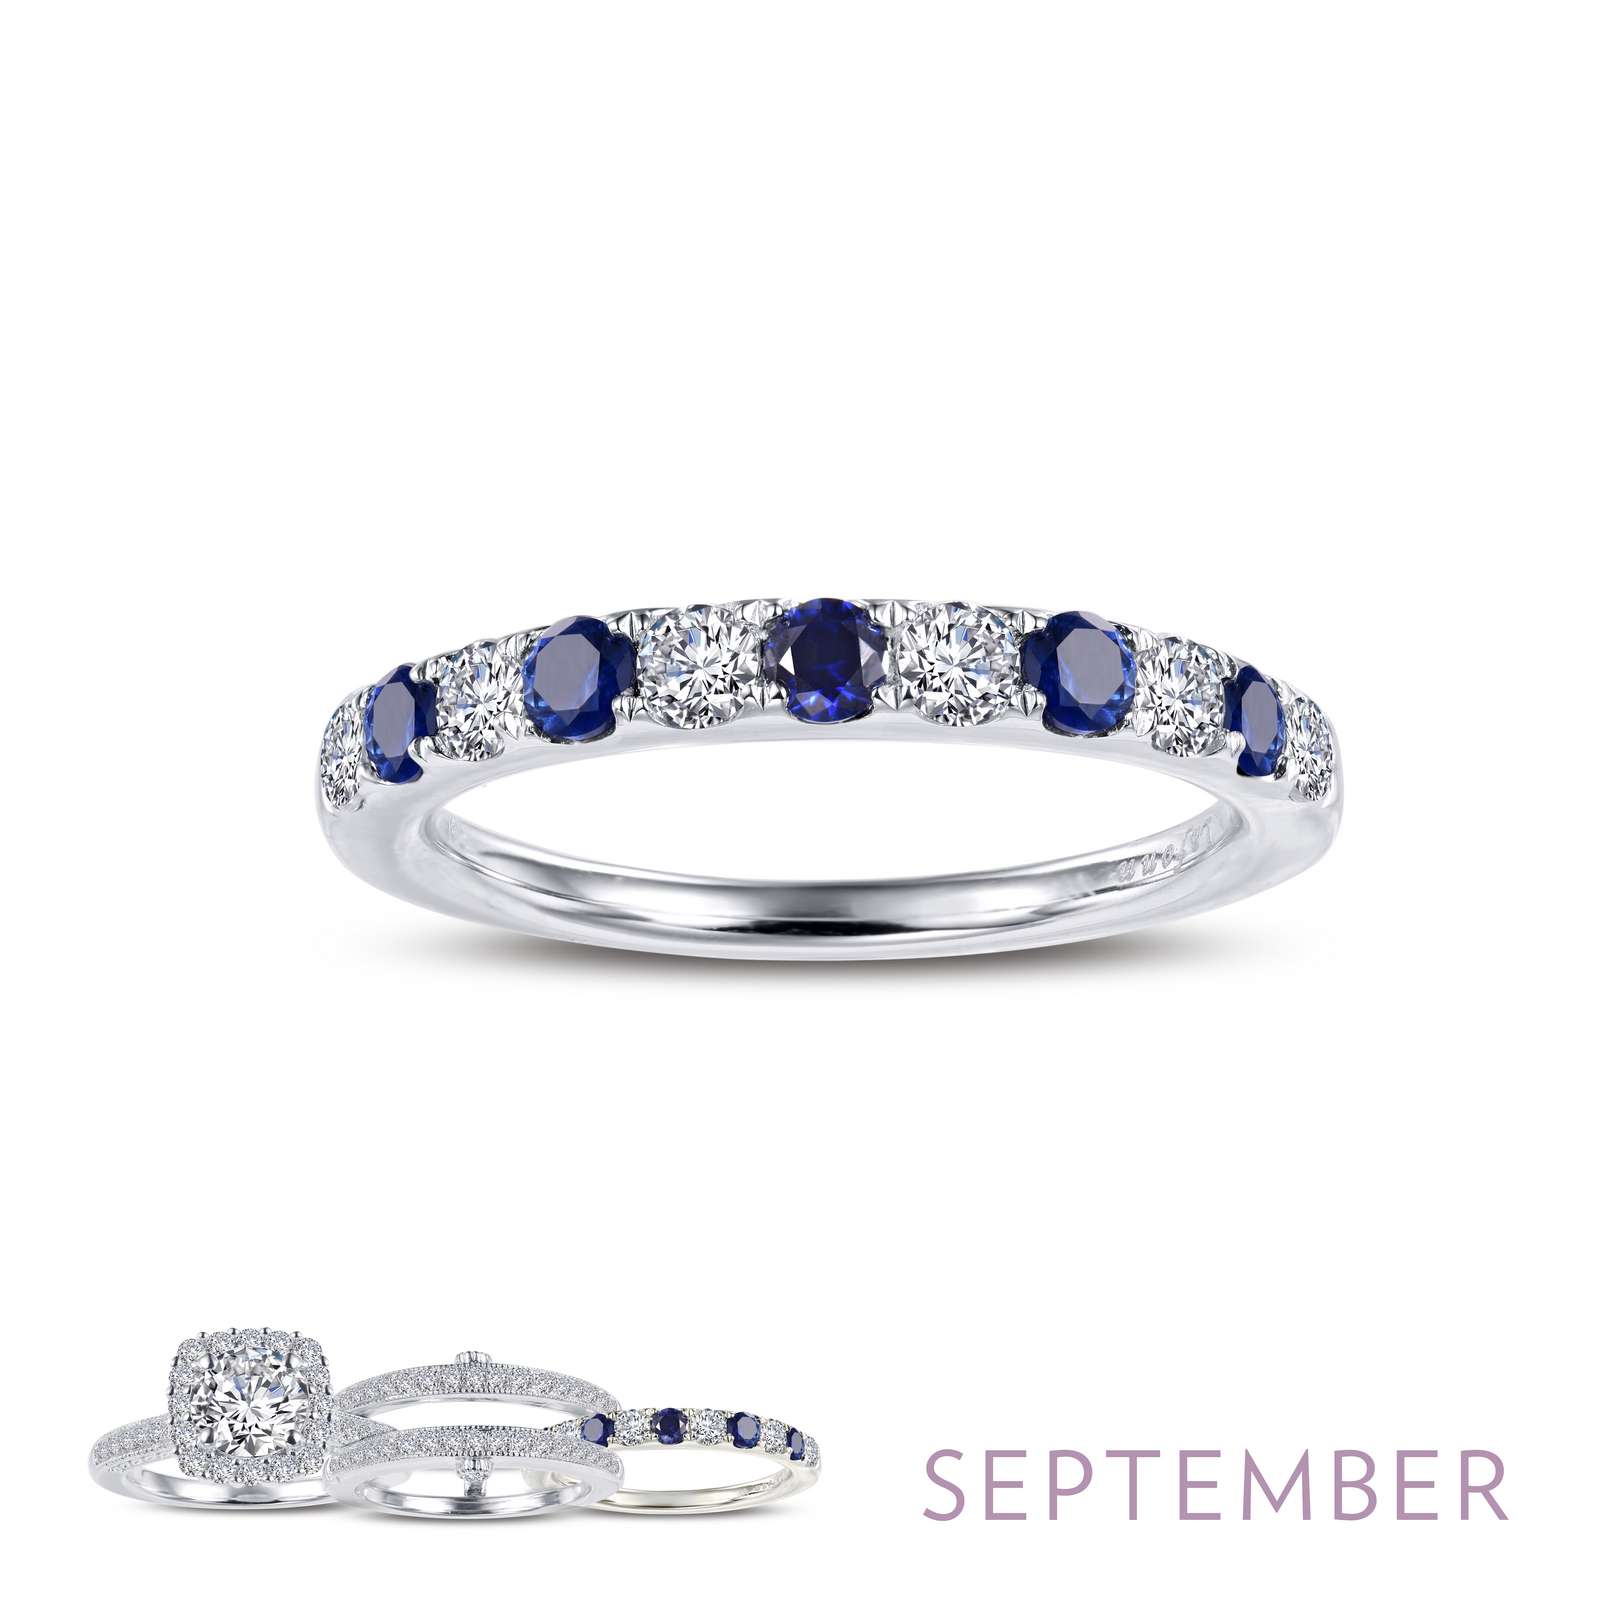 September Birthstone Ring Griner Jewelry Co. Moultrie, GA